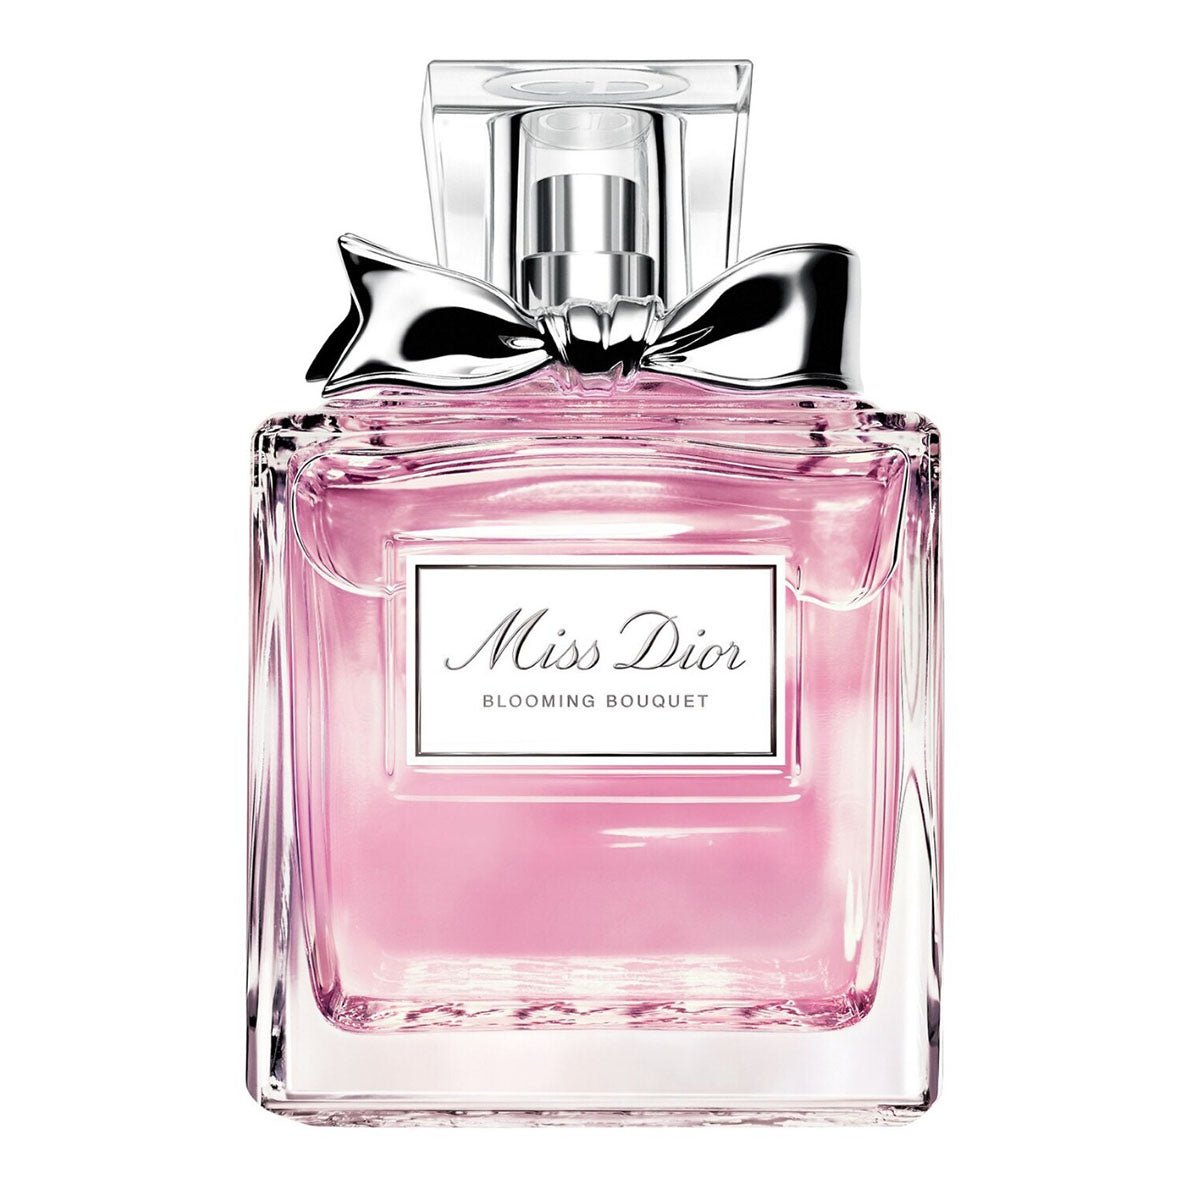 Christian Dior Miss Dior Blooming Bouquet For Women Edt Spray 100ml -Perfume - AllurebeautypkChristian Dior Miss Dior Blooming Bouquet For Women Edt Spray 100ml -Perfume